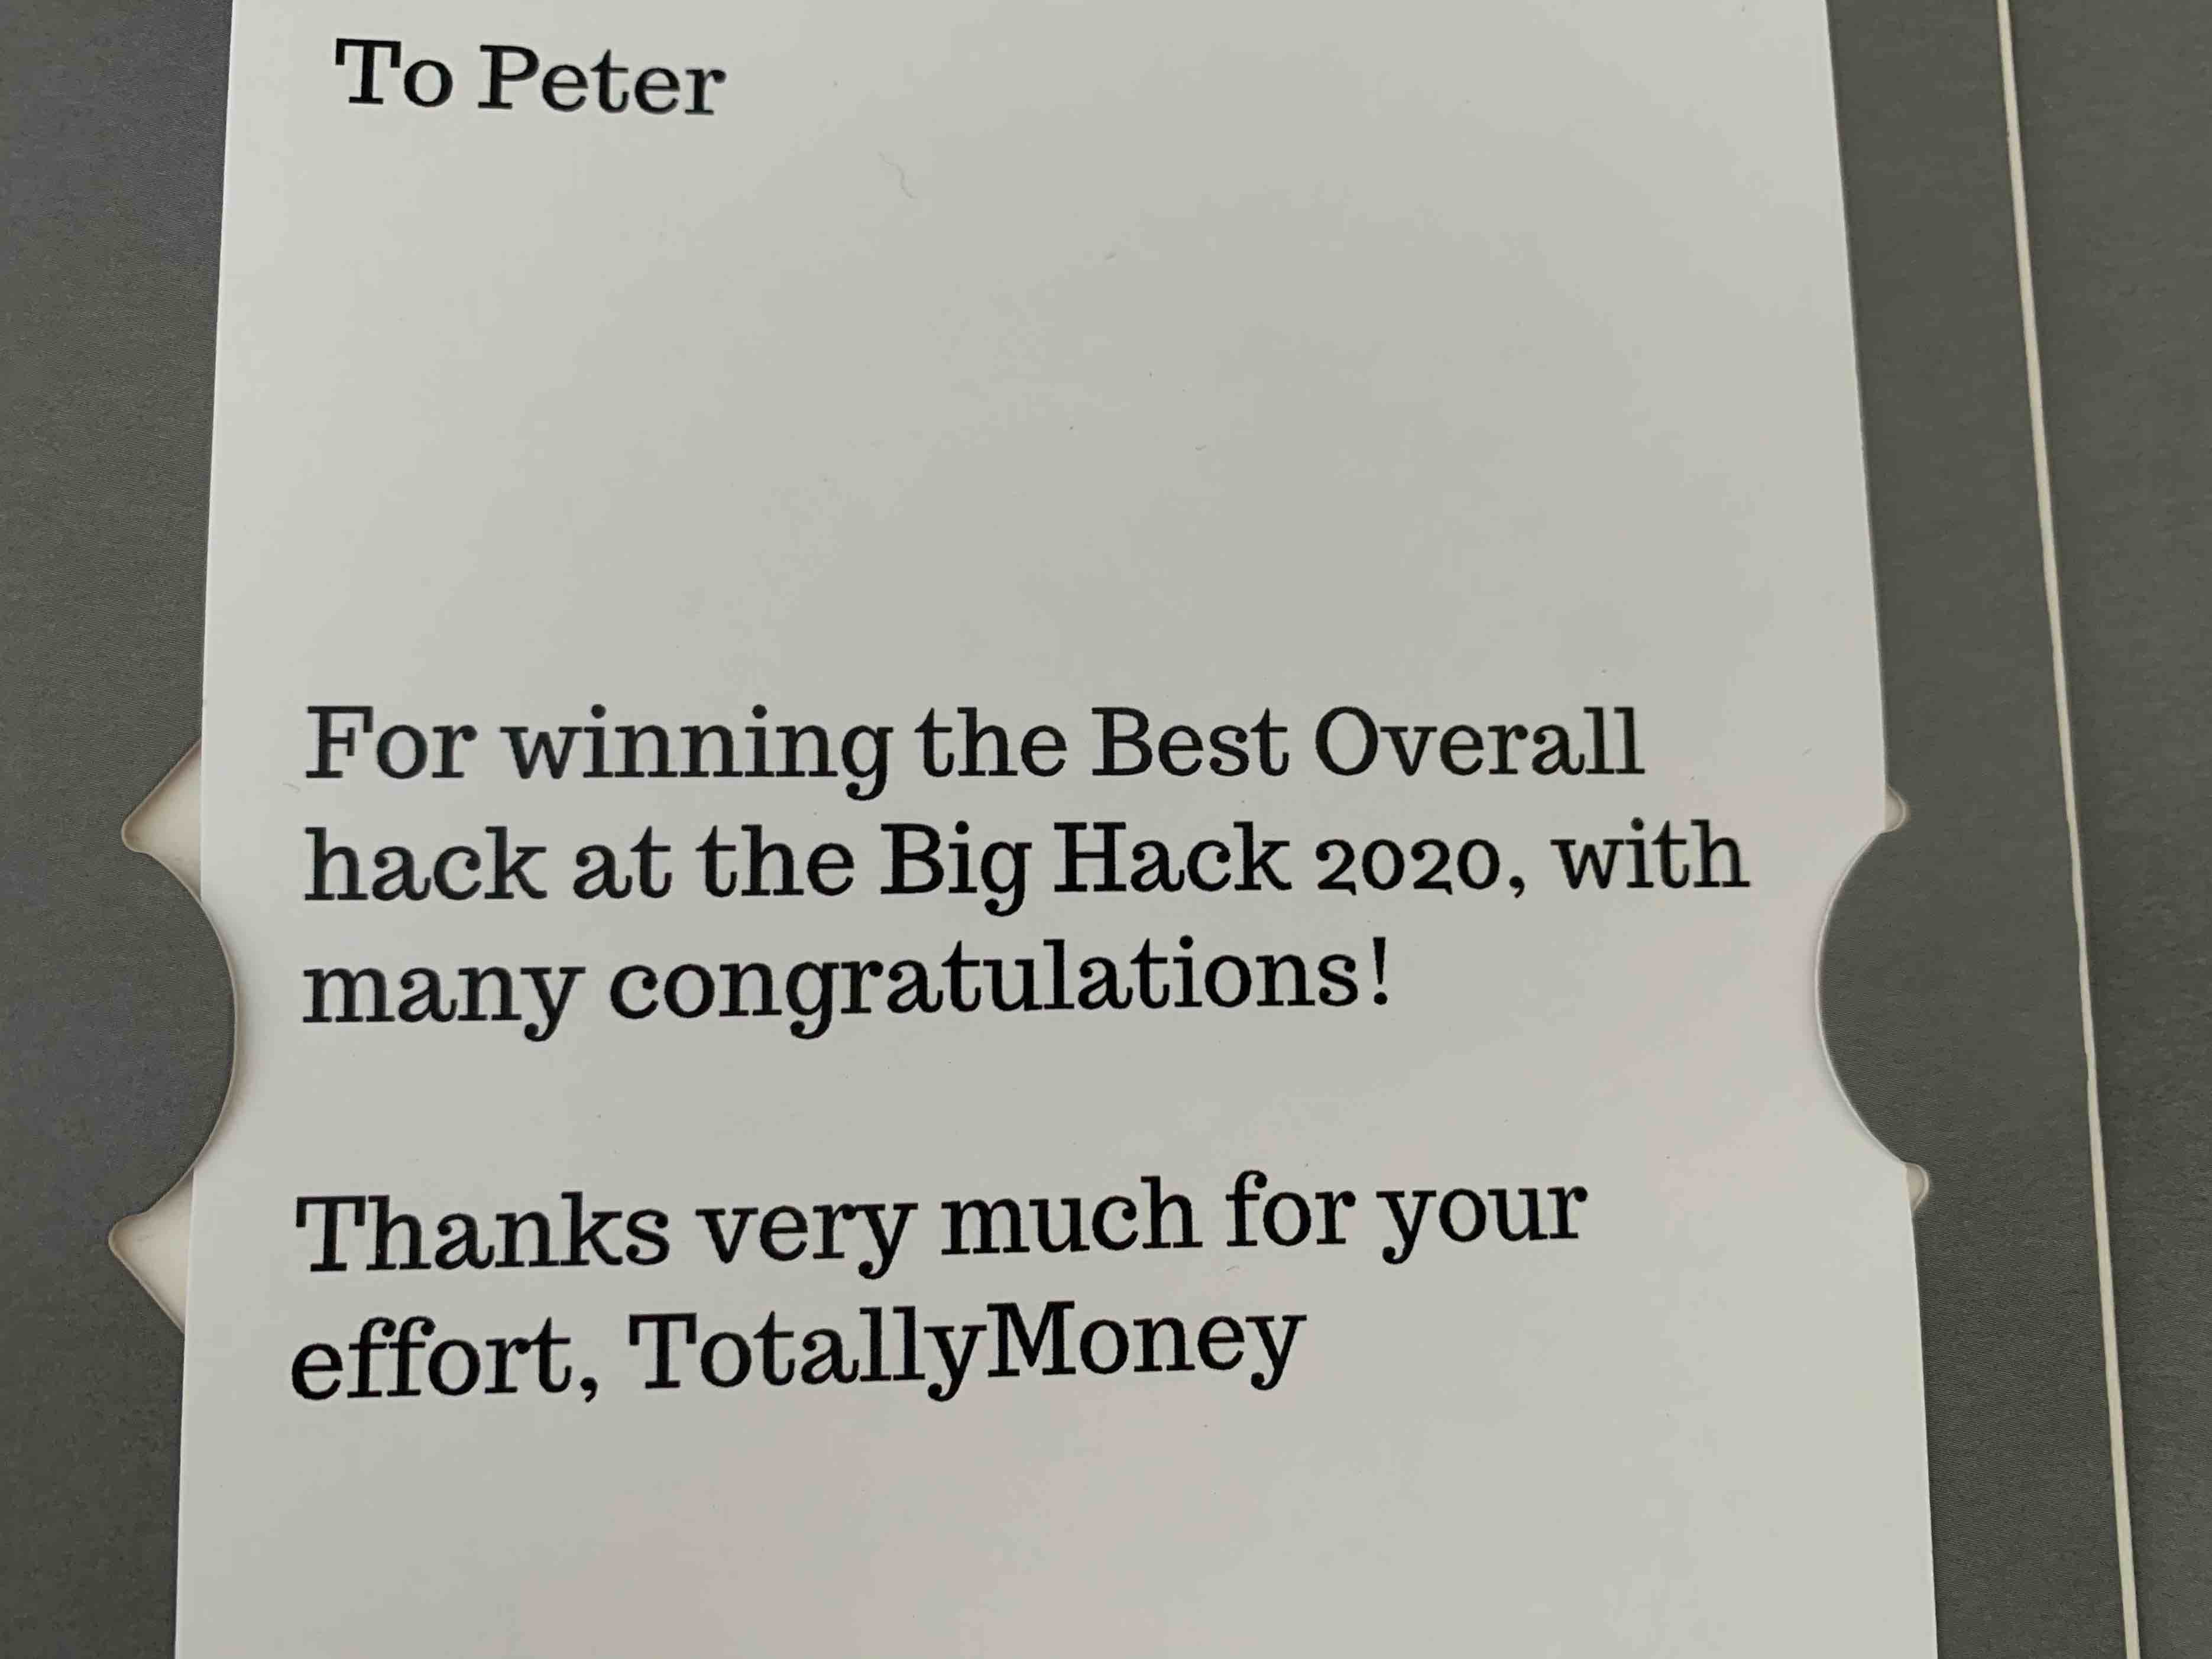 Card with printed text: To Peter For winning the Best Overall hack at the Big Hack 2020, with many congratulations! Thanks very much for your effort, TotallyMoney.